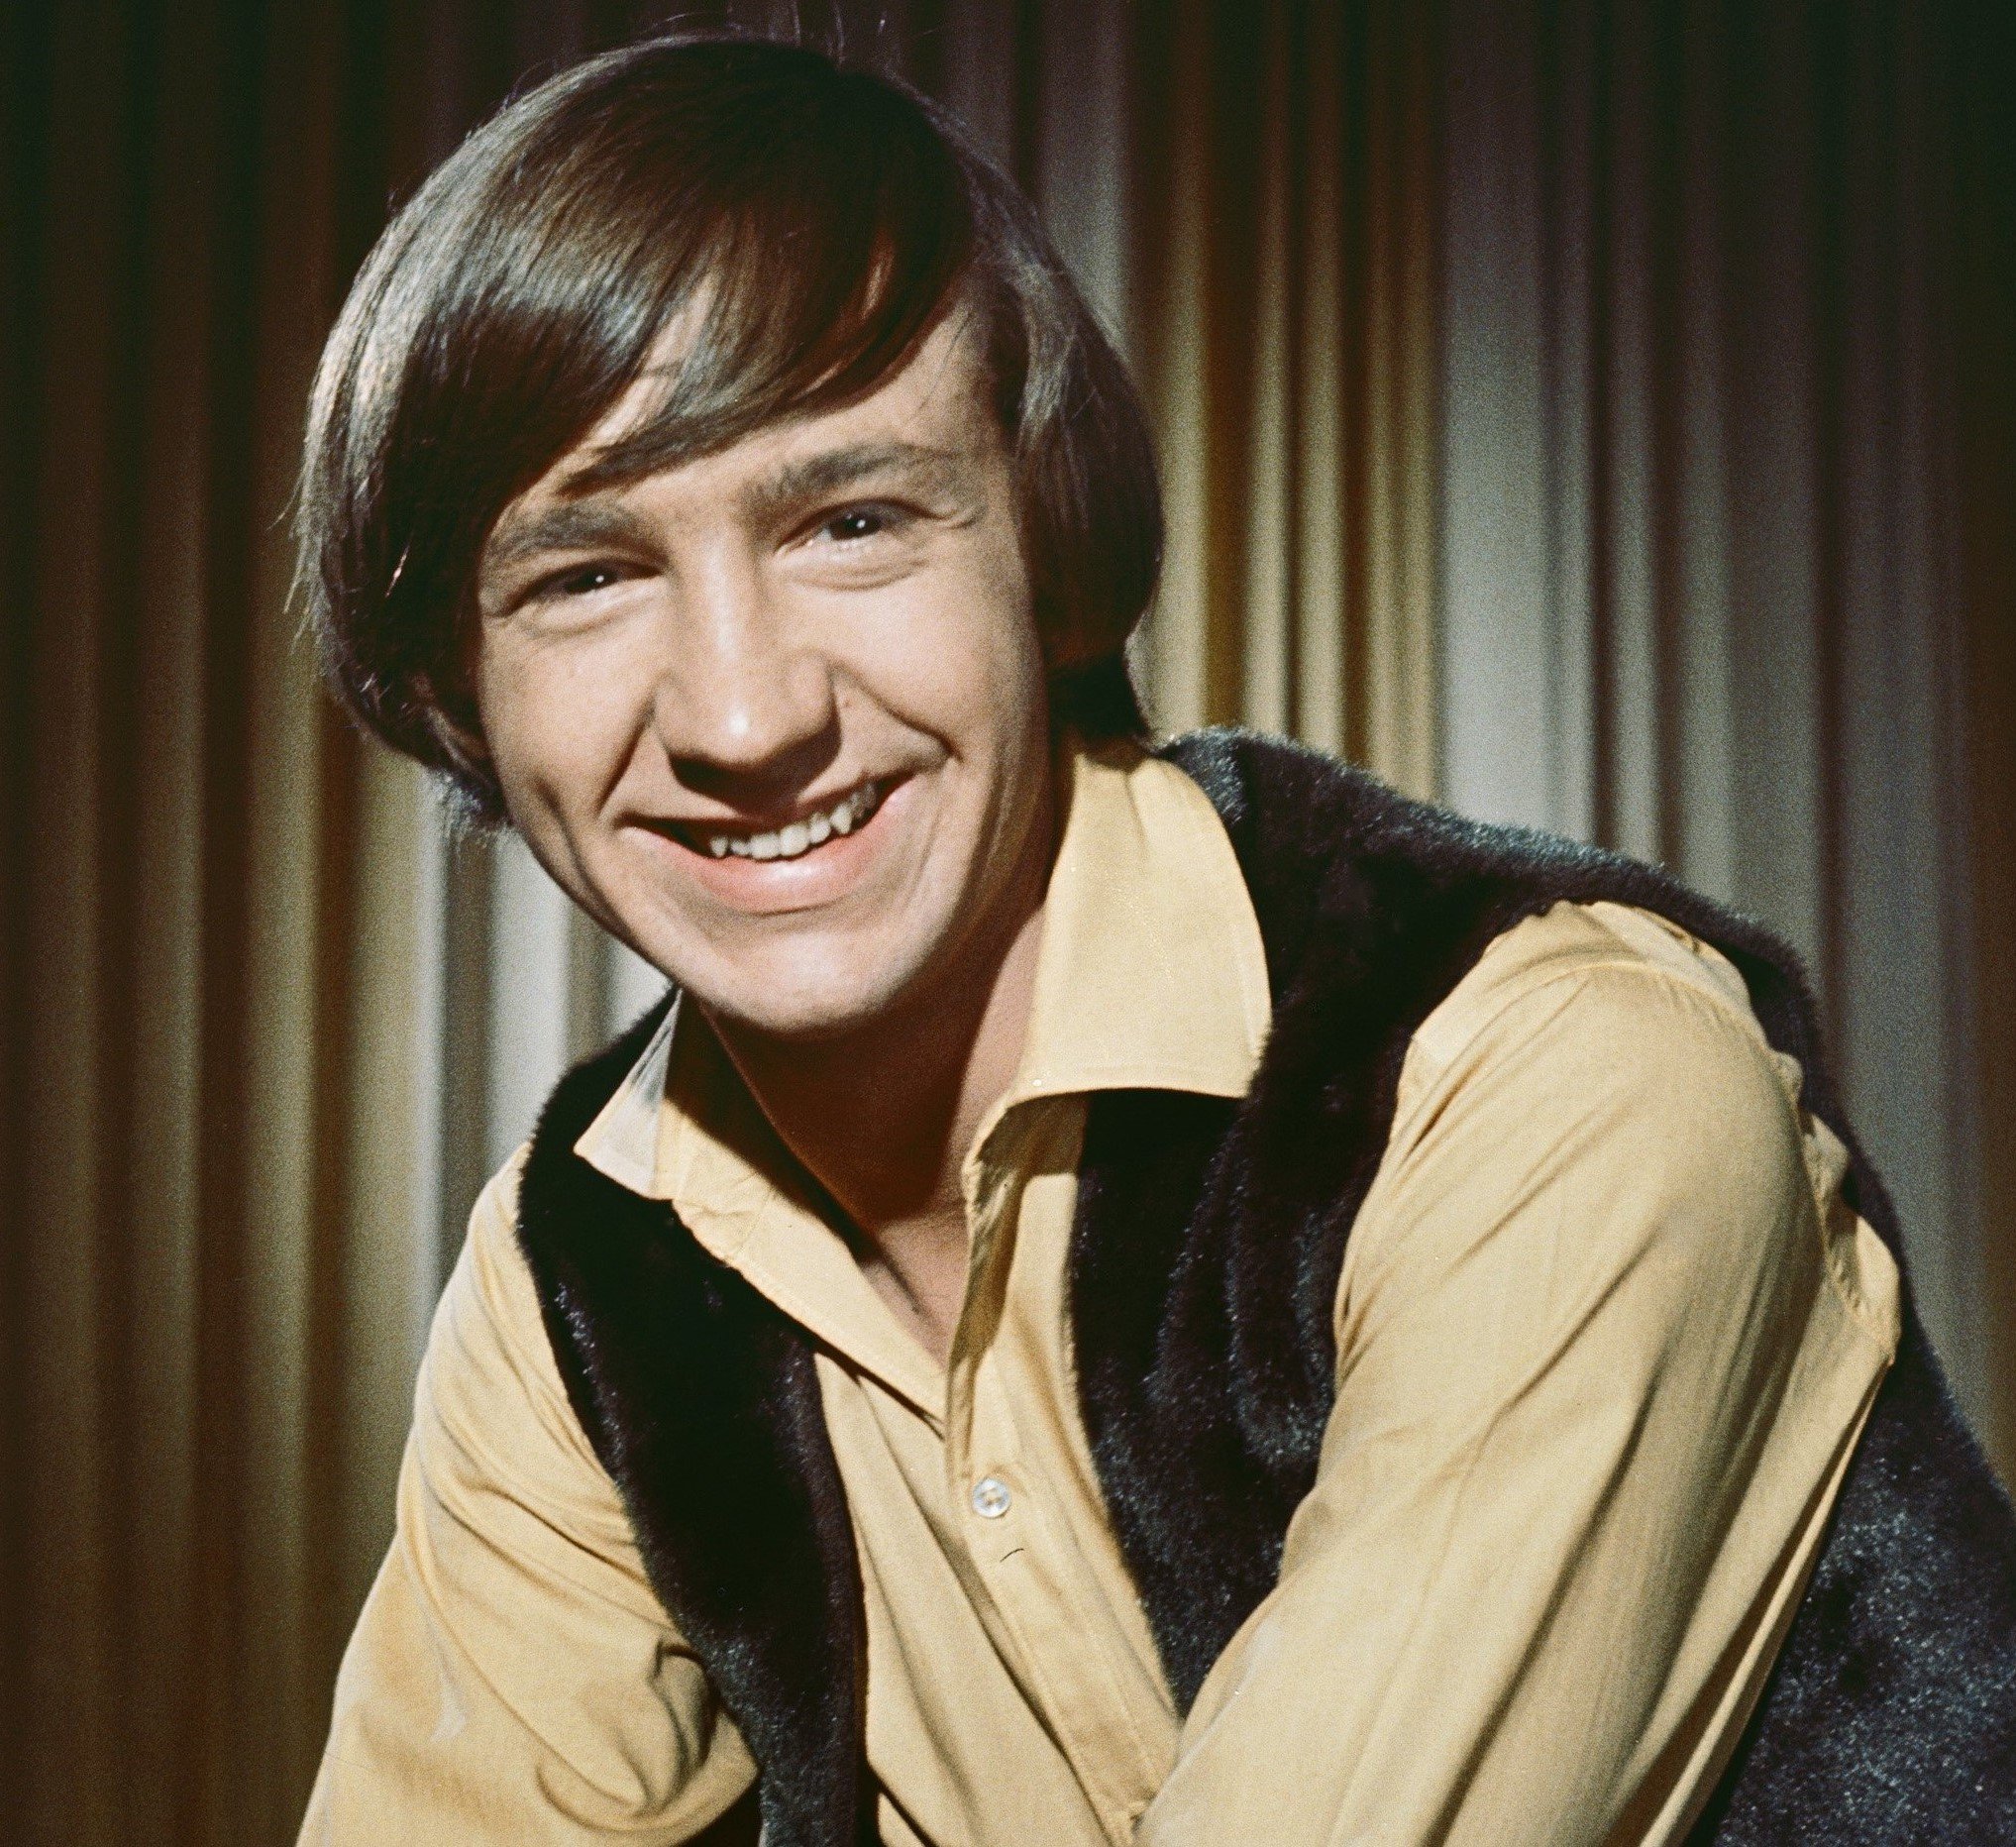 The Monkees' Peter Tork in front of a curtain